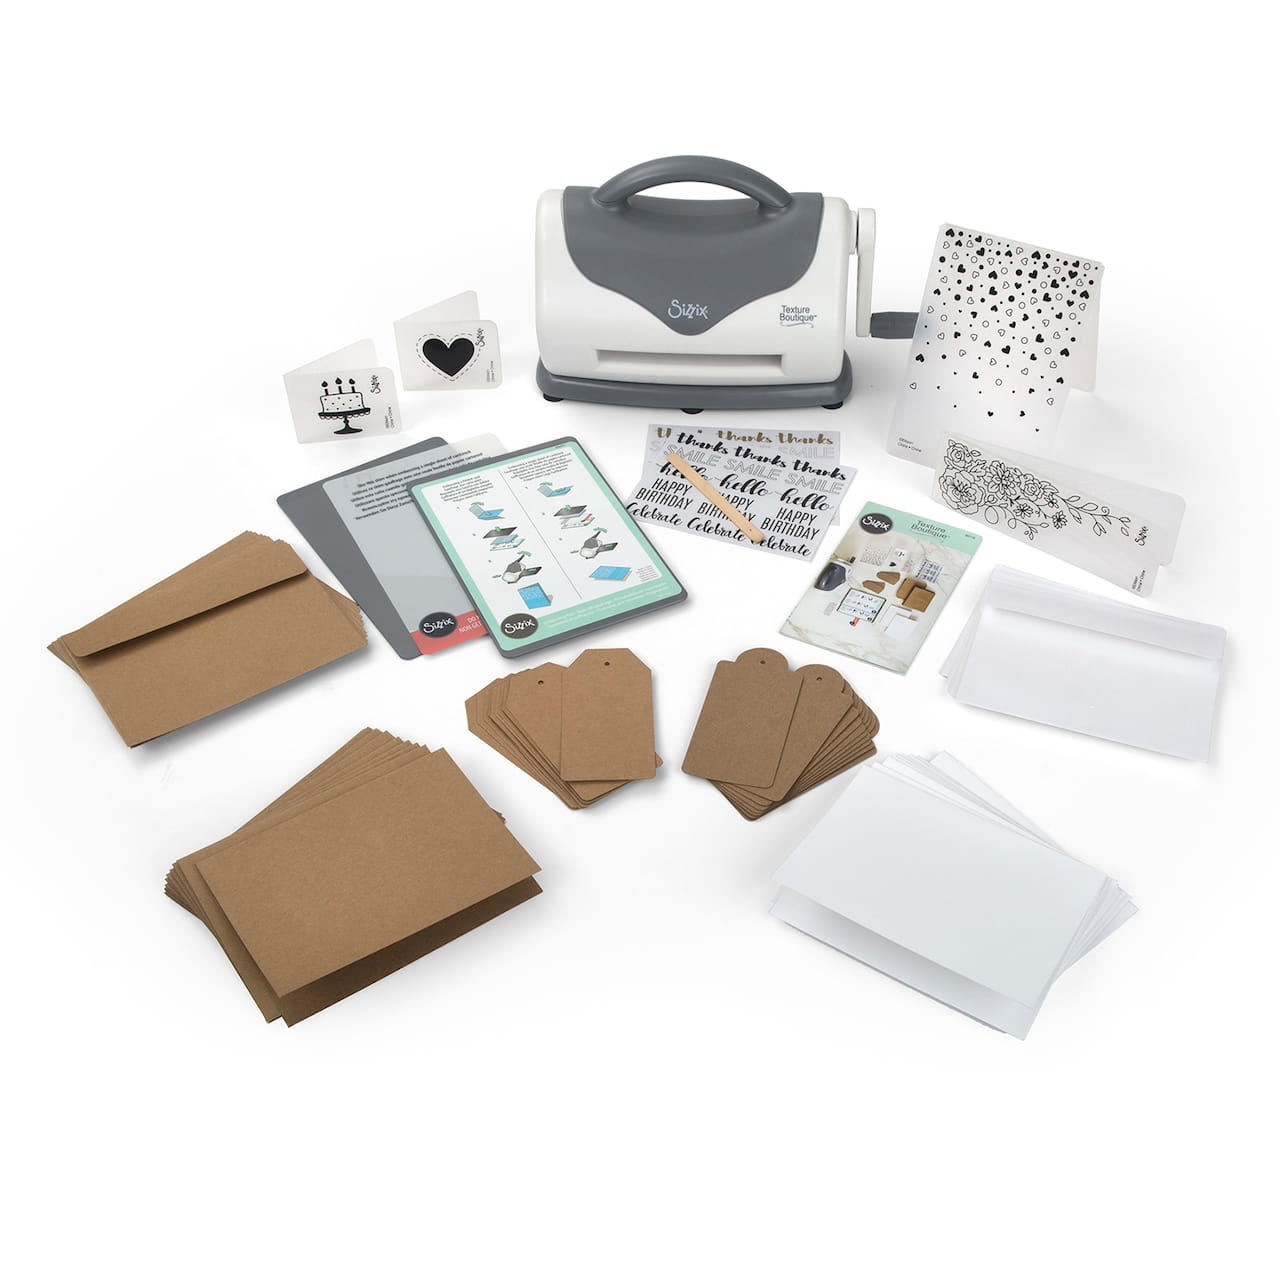 Sizzix&#xAE; Texture Boutique&#x2122; Embossing Machine